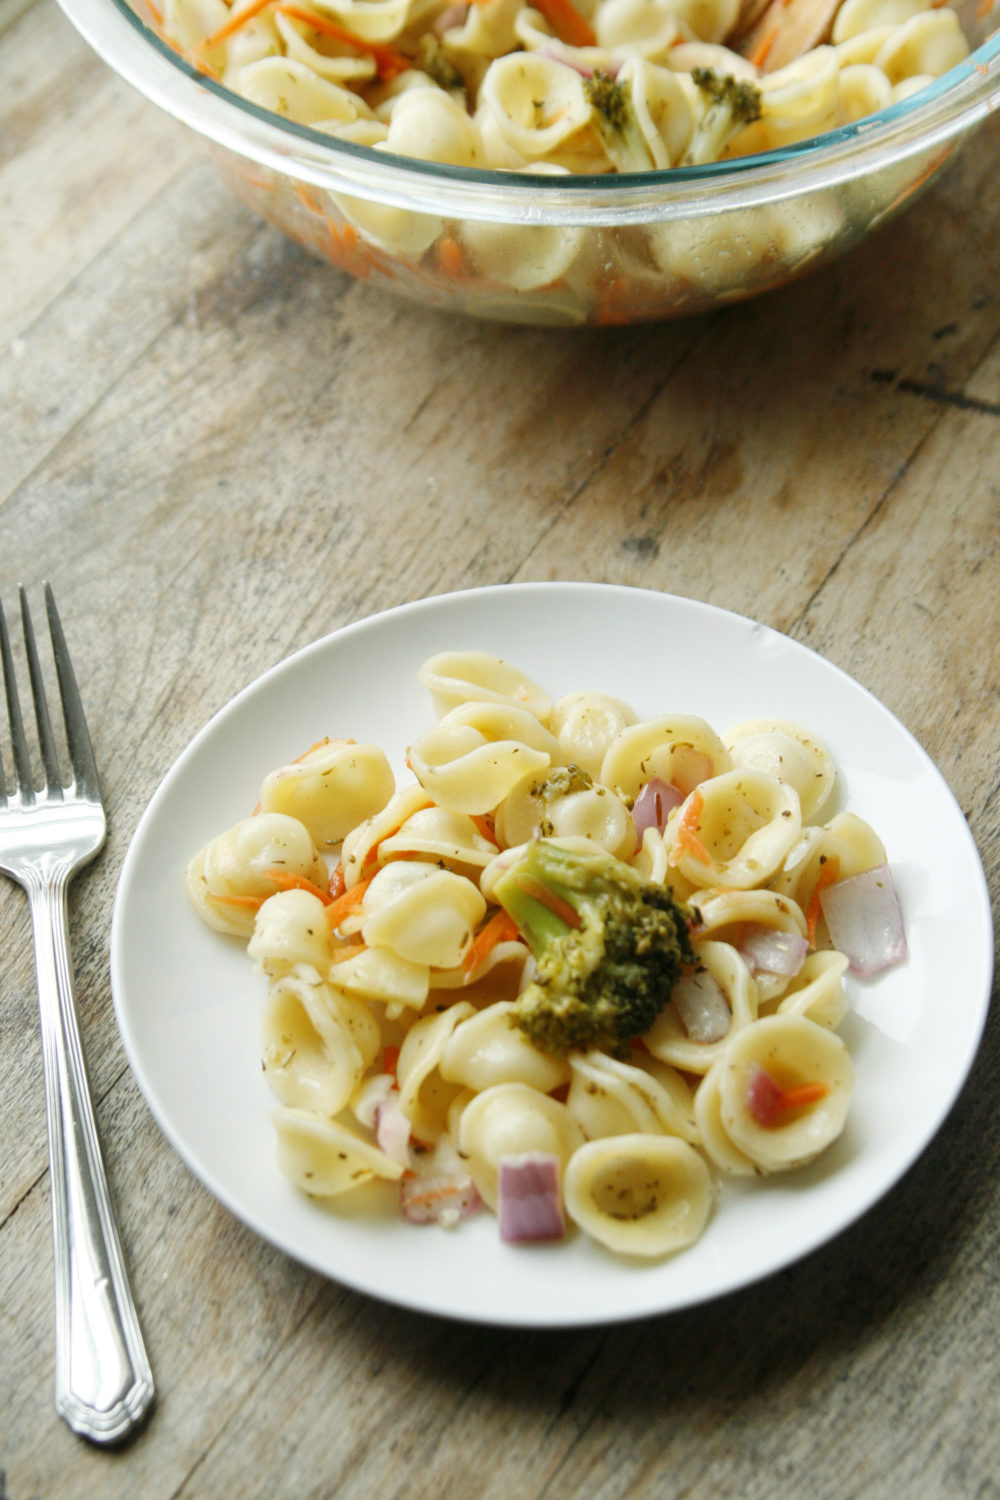 Orecchiette Pasta Salad with Lemon and Oregano is shown on a white plate with a silver fork on a wooden table.